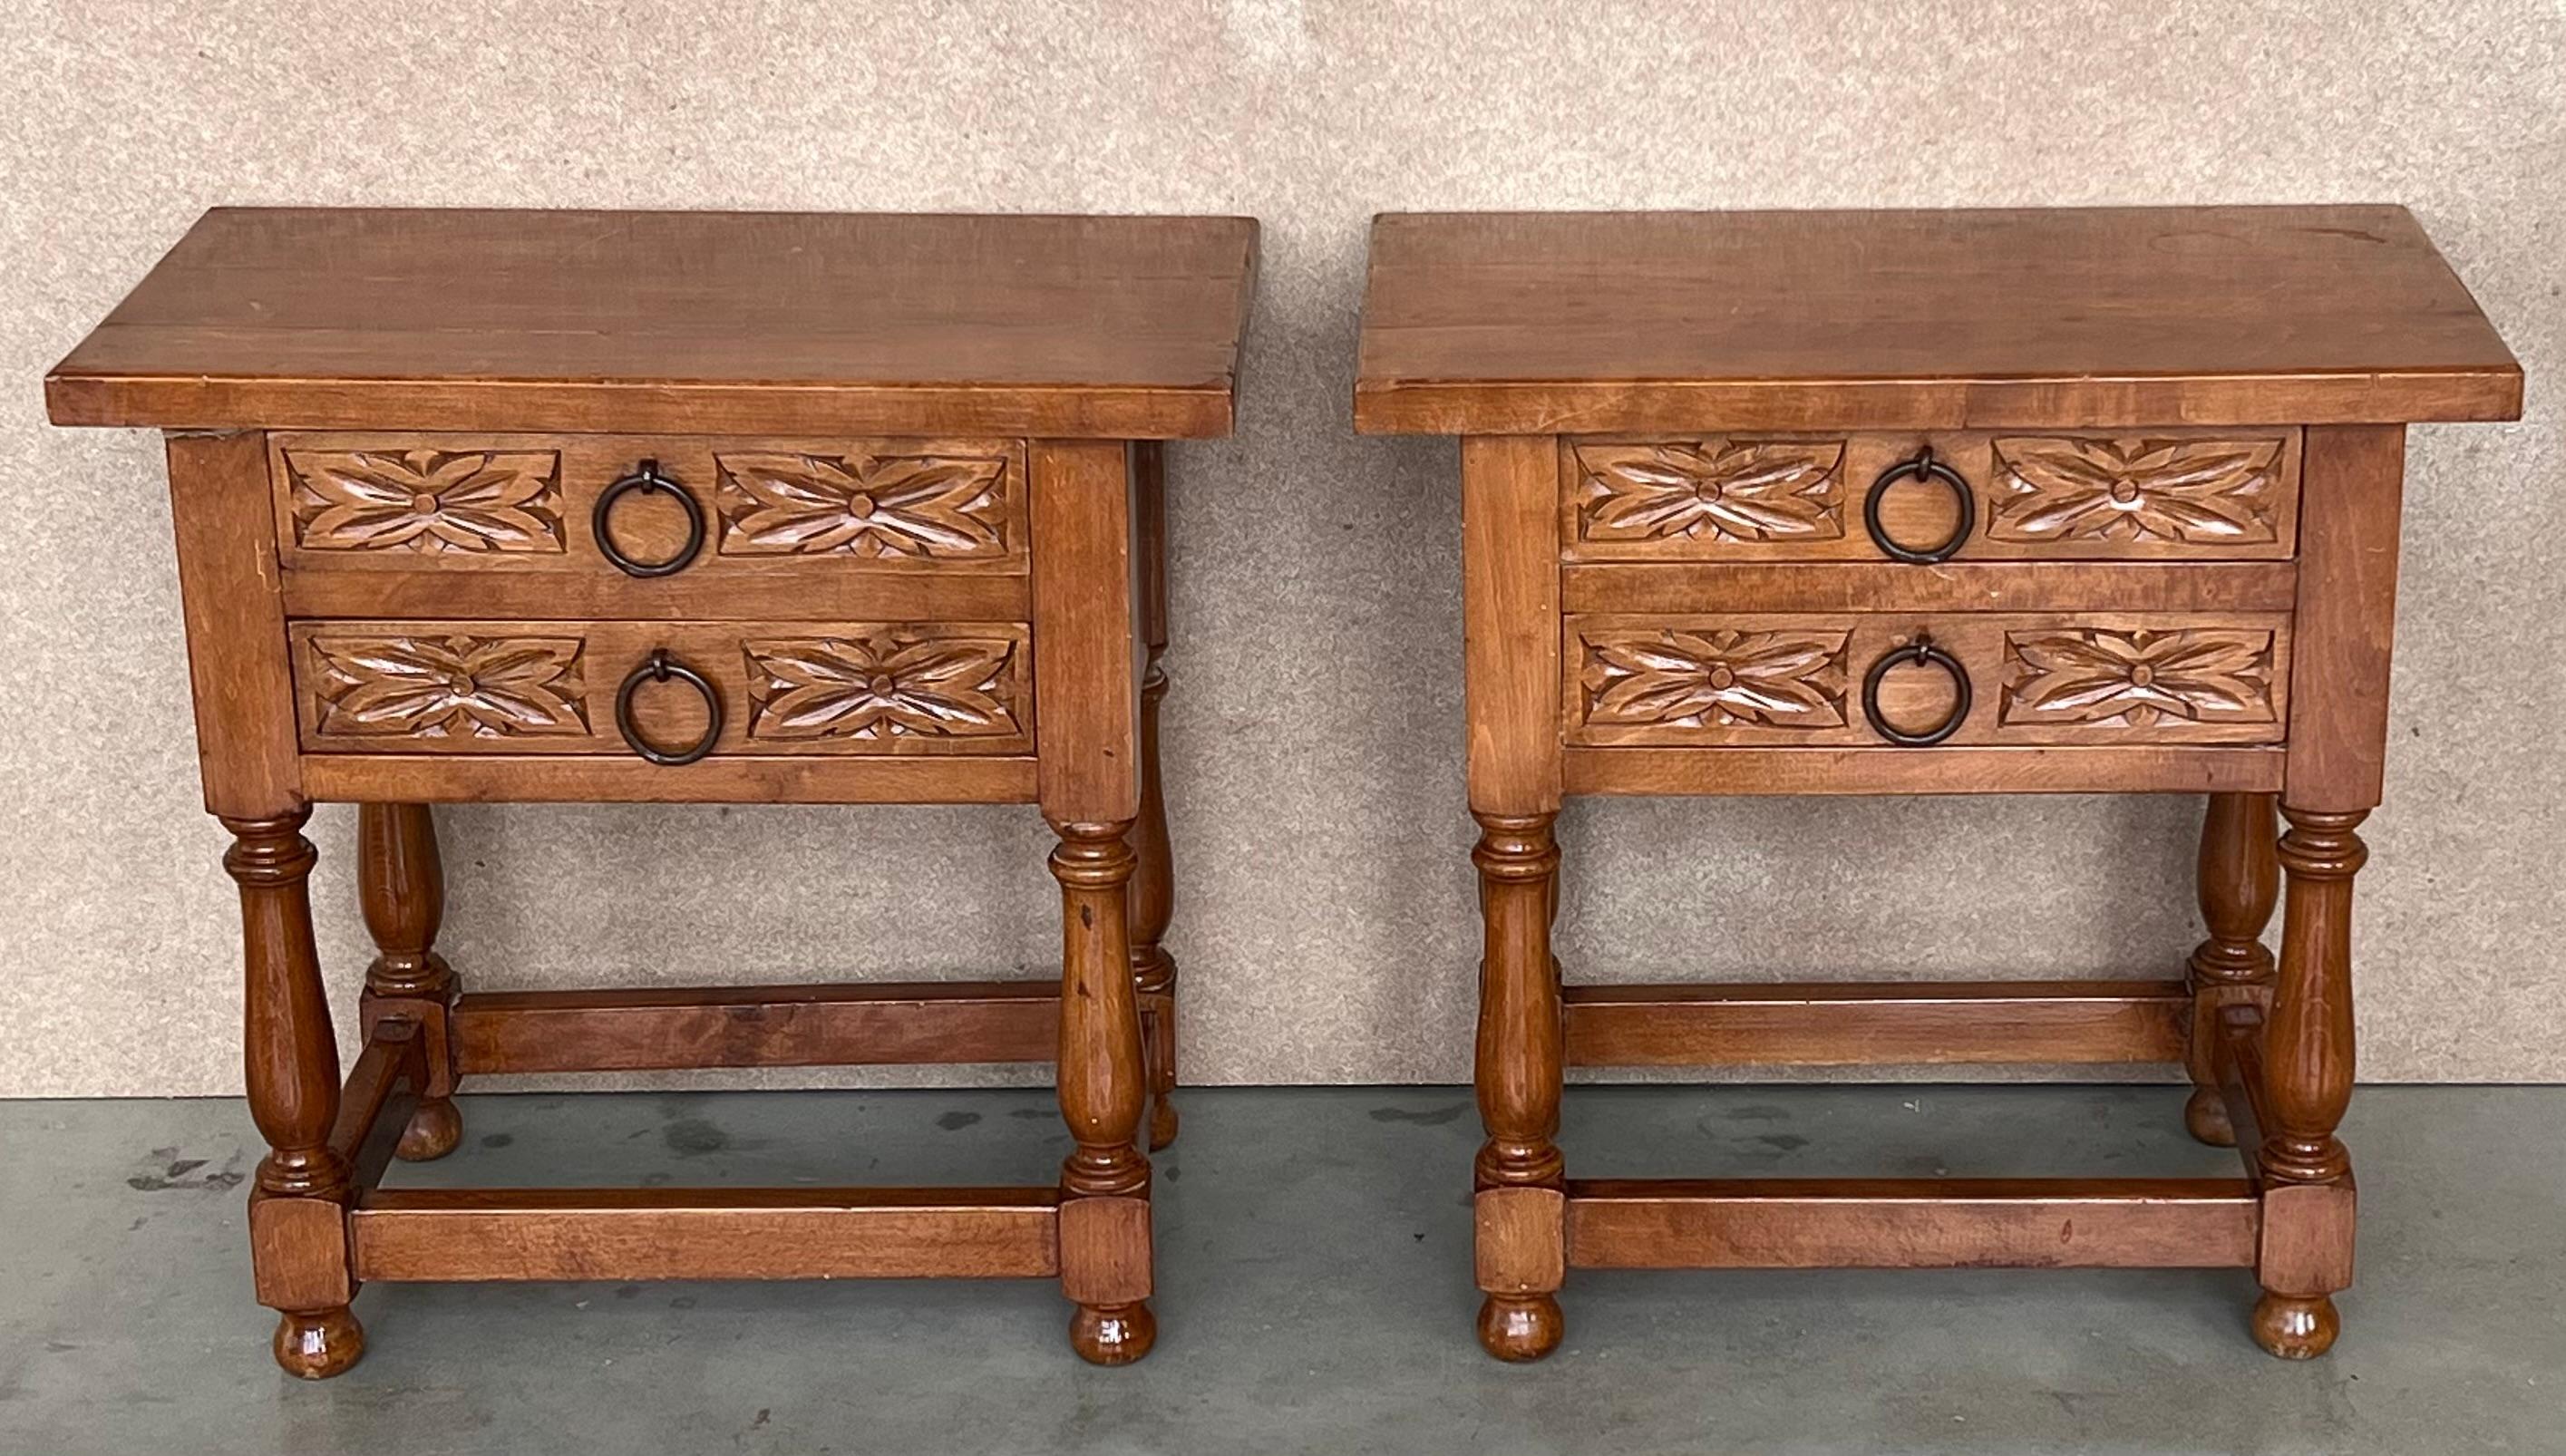 20th century pair of Spanish nightstands with two carved drawer and iron hardware.
Beautiful tables that you can use like a nightstands or side tables, end tables, or table lamp.